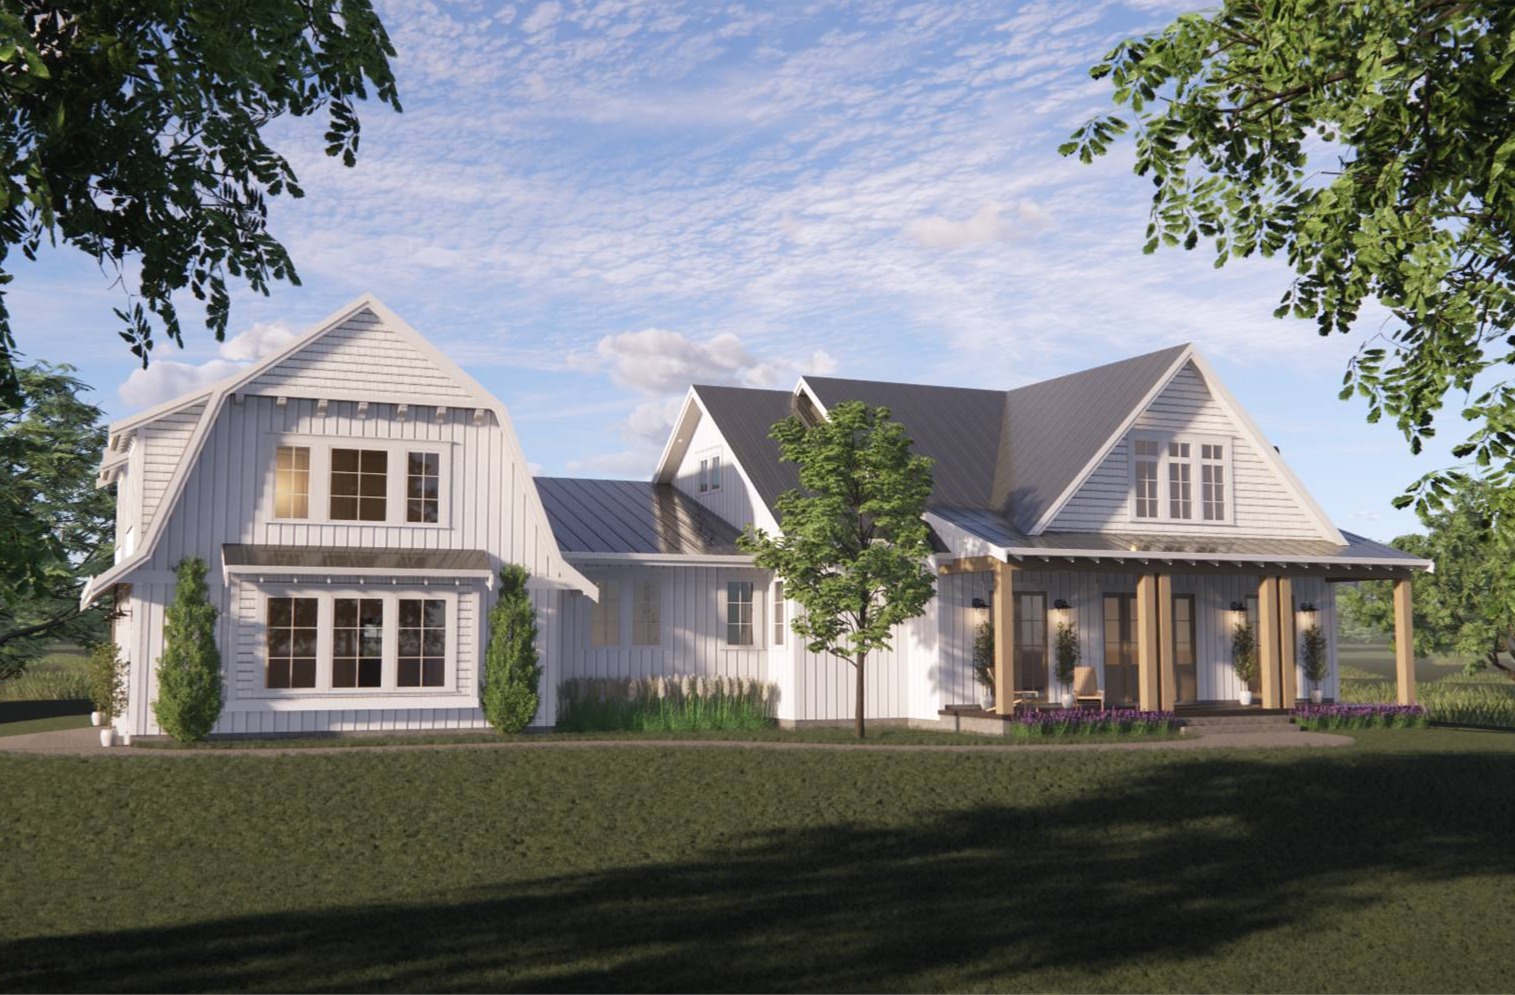 Modern Farmhouse with Optional In-Law Suite Above Garage